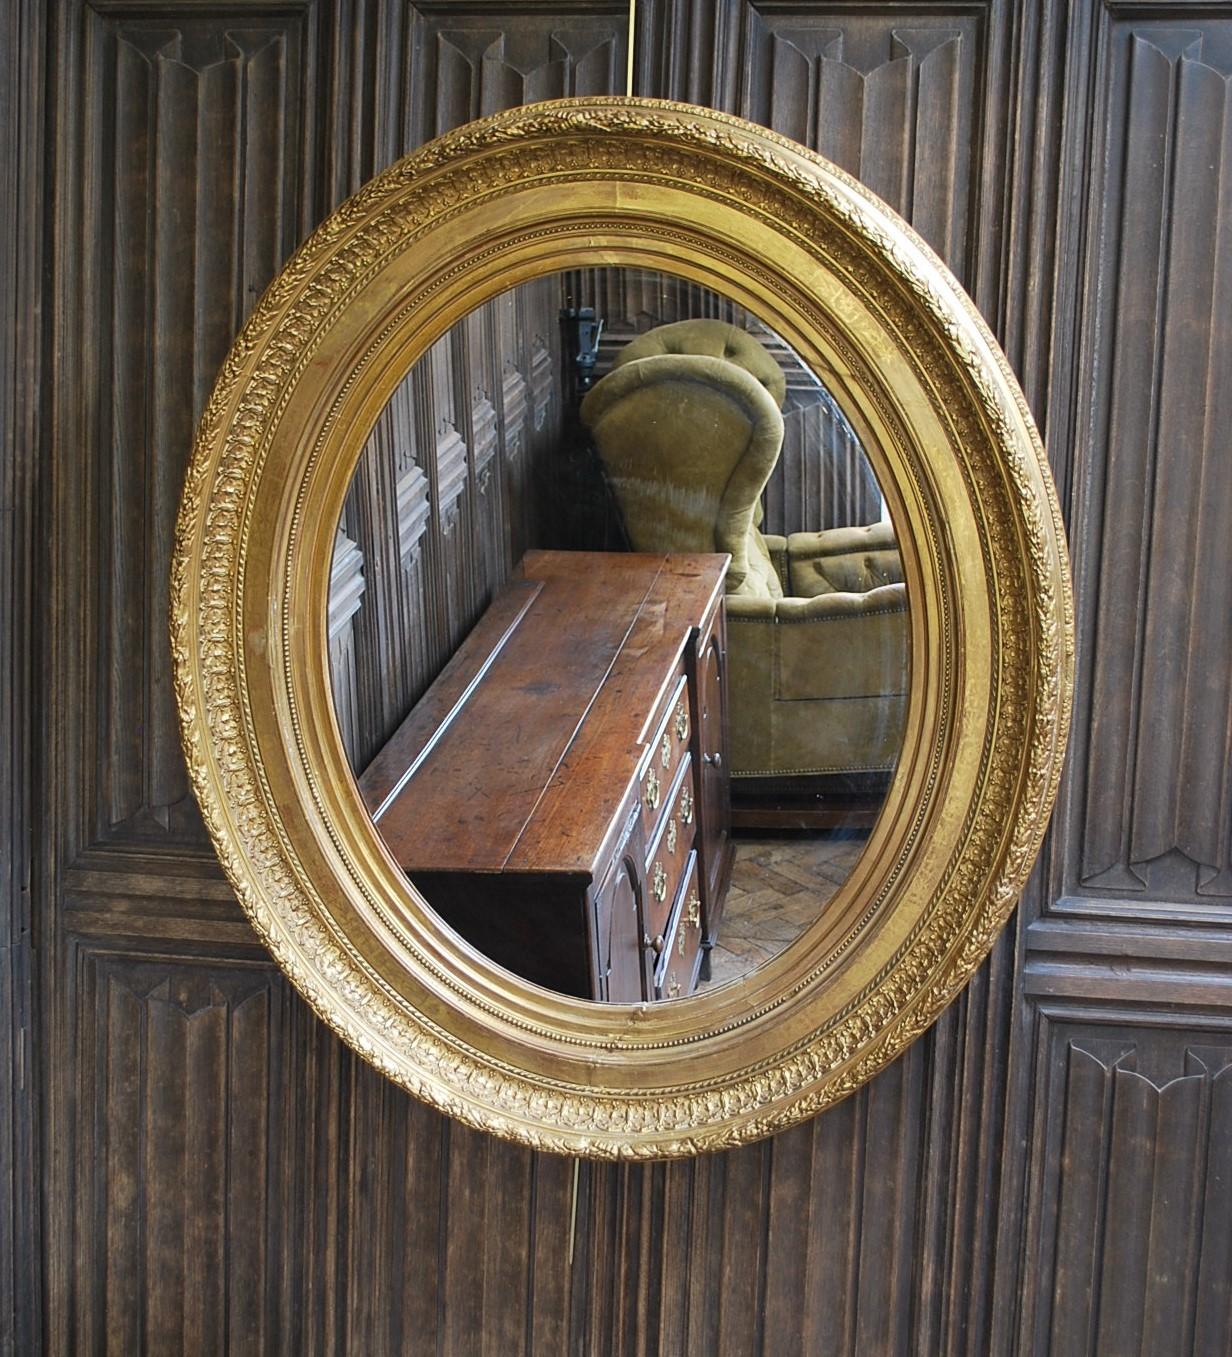 Hutton-Clarke Antiques is delighted to present a magnificent Large Antique Oval Gilded Mirror. This exquisite mirror boasts a deep concave molded frame adorned with a wreath motif along its exterior edge, while traditional moldings grace its